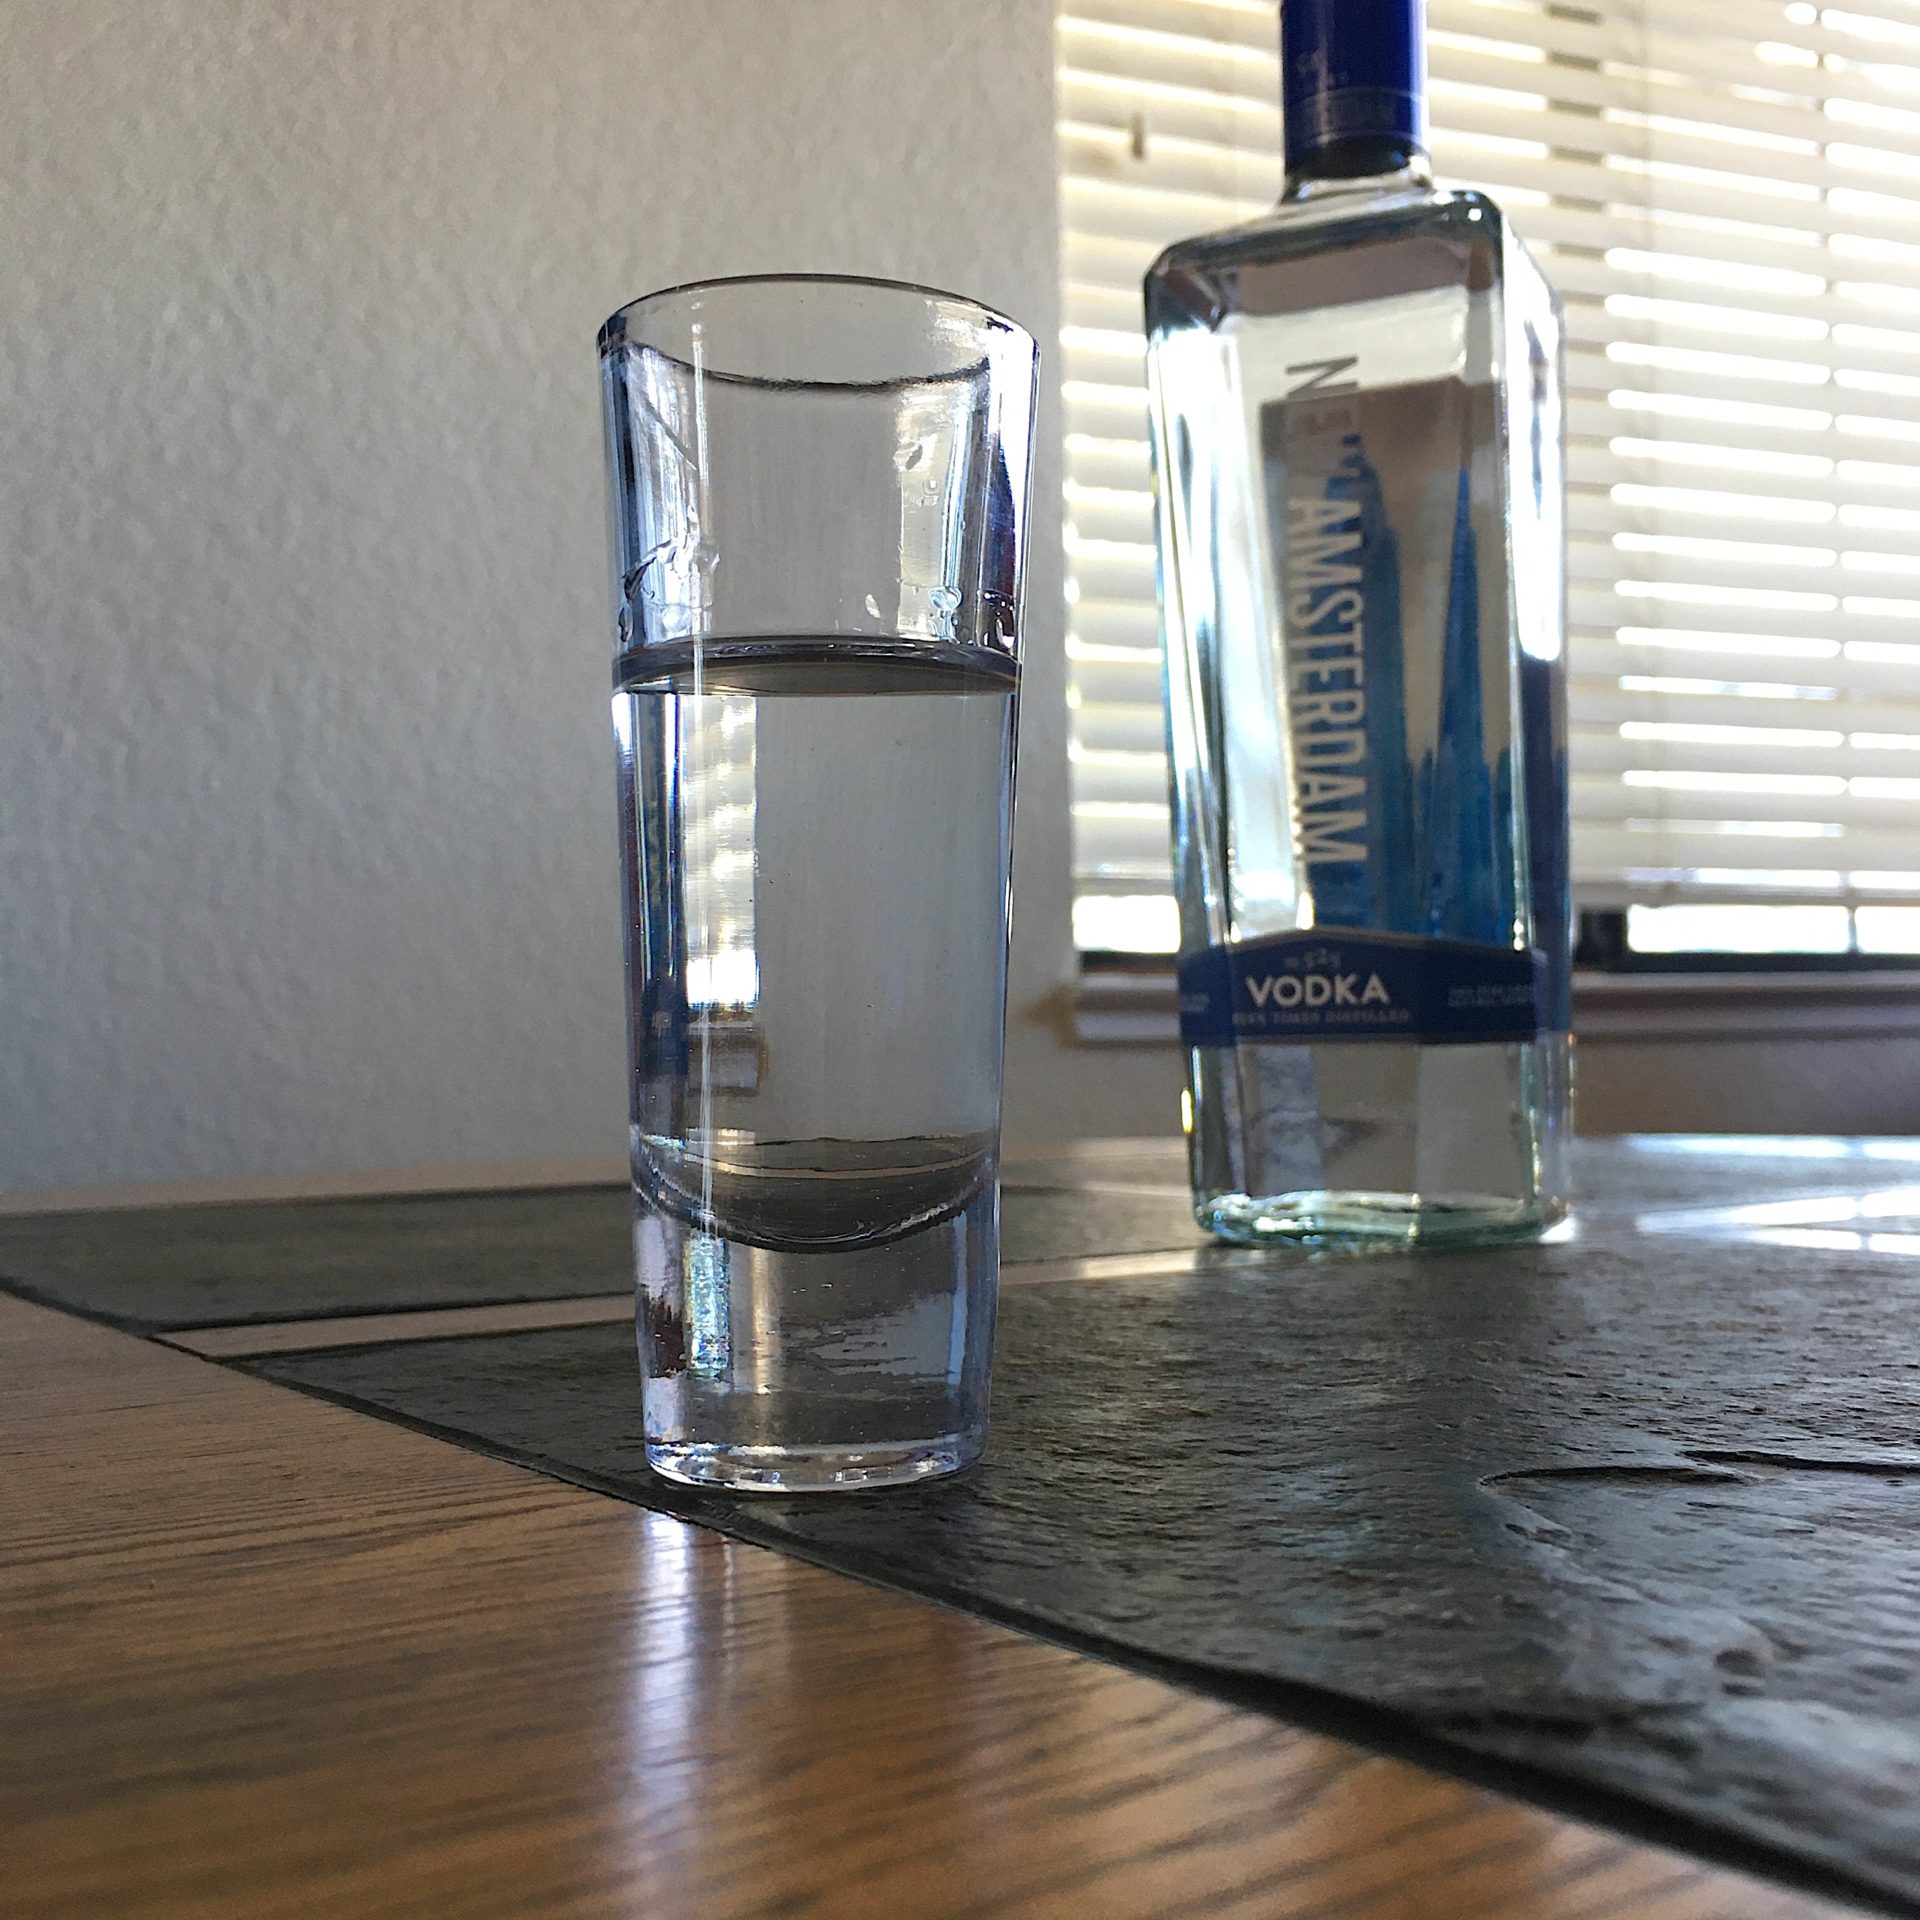 Shot glass full of New Amsterdam Vodka on top of a stone and wood table, with the vodka bottle in the background